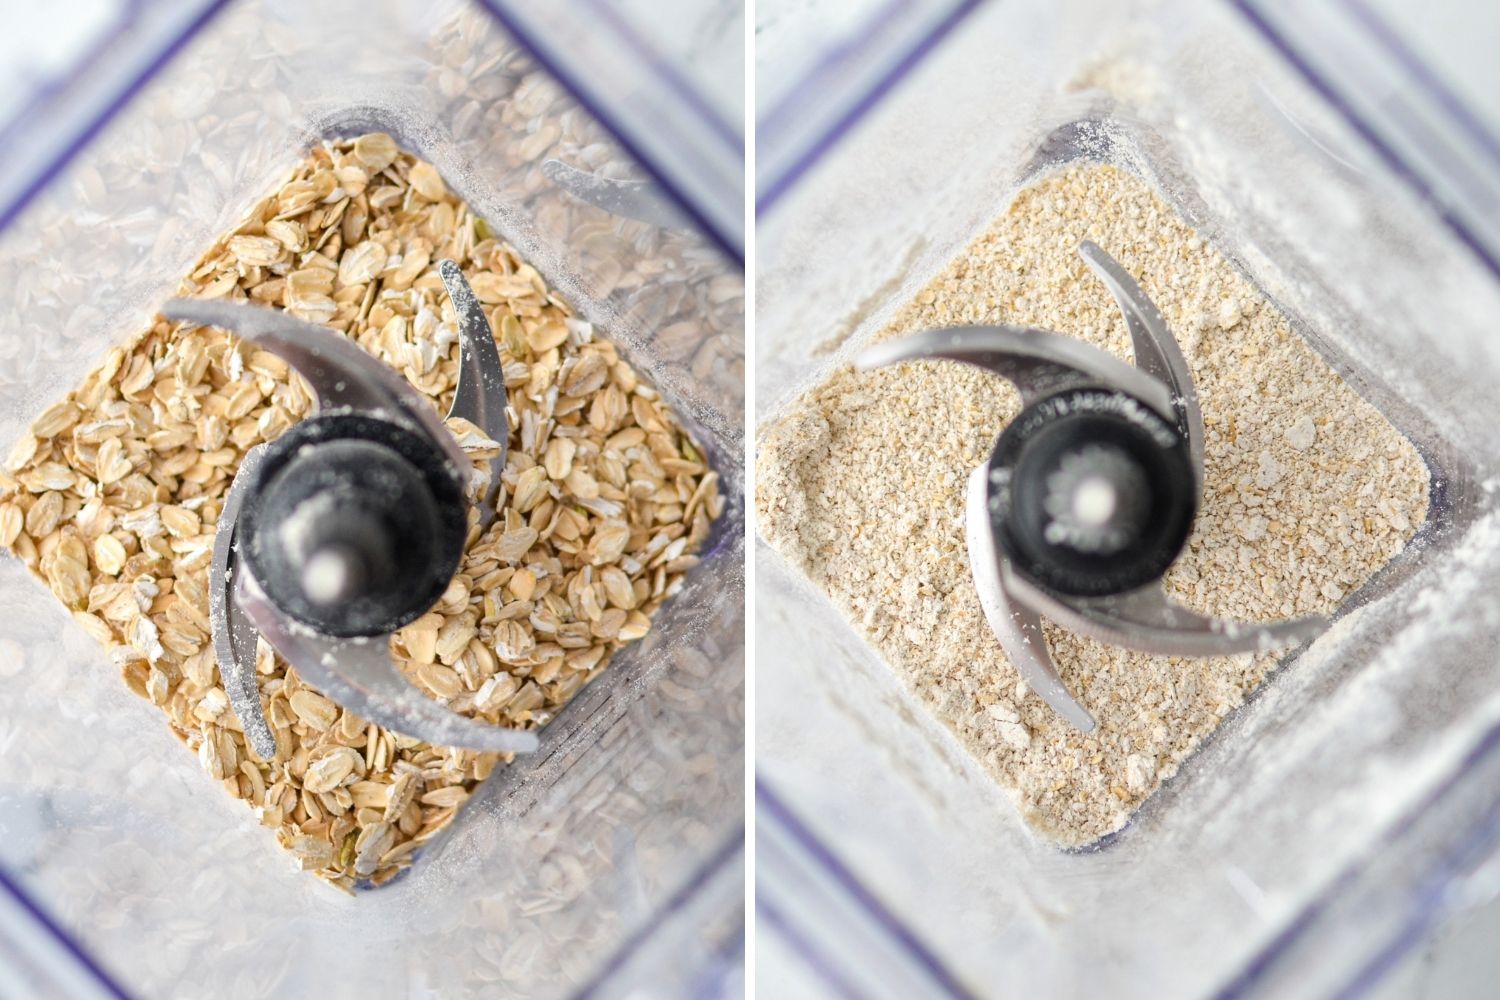 A side-by-side comparison of oats after blending into oat flour.